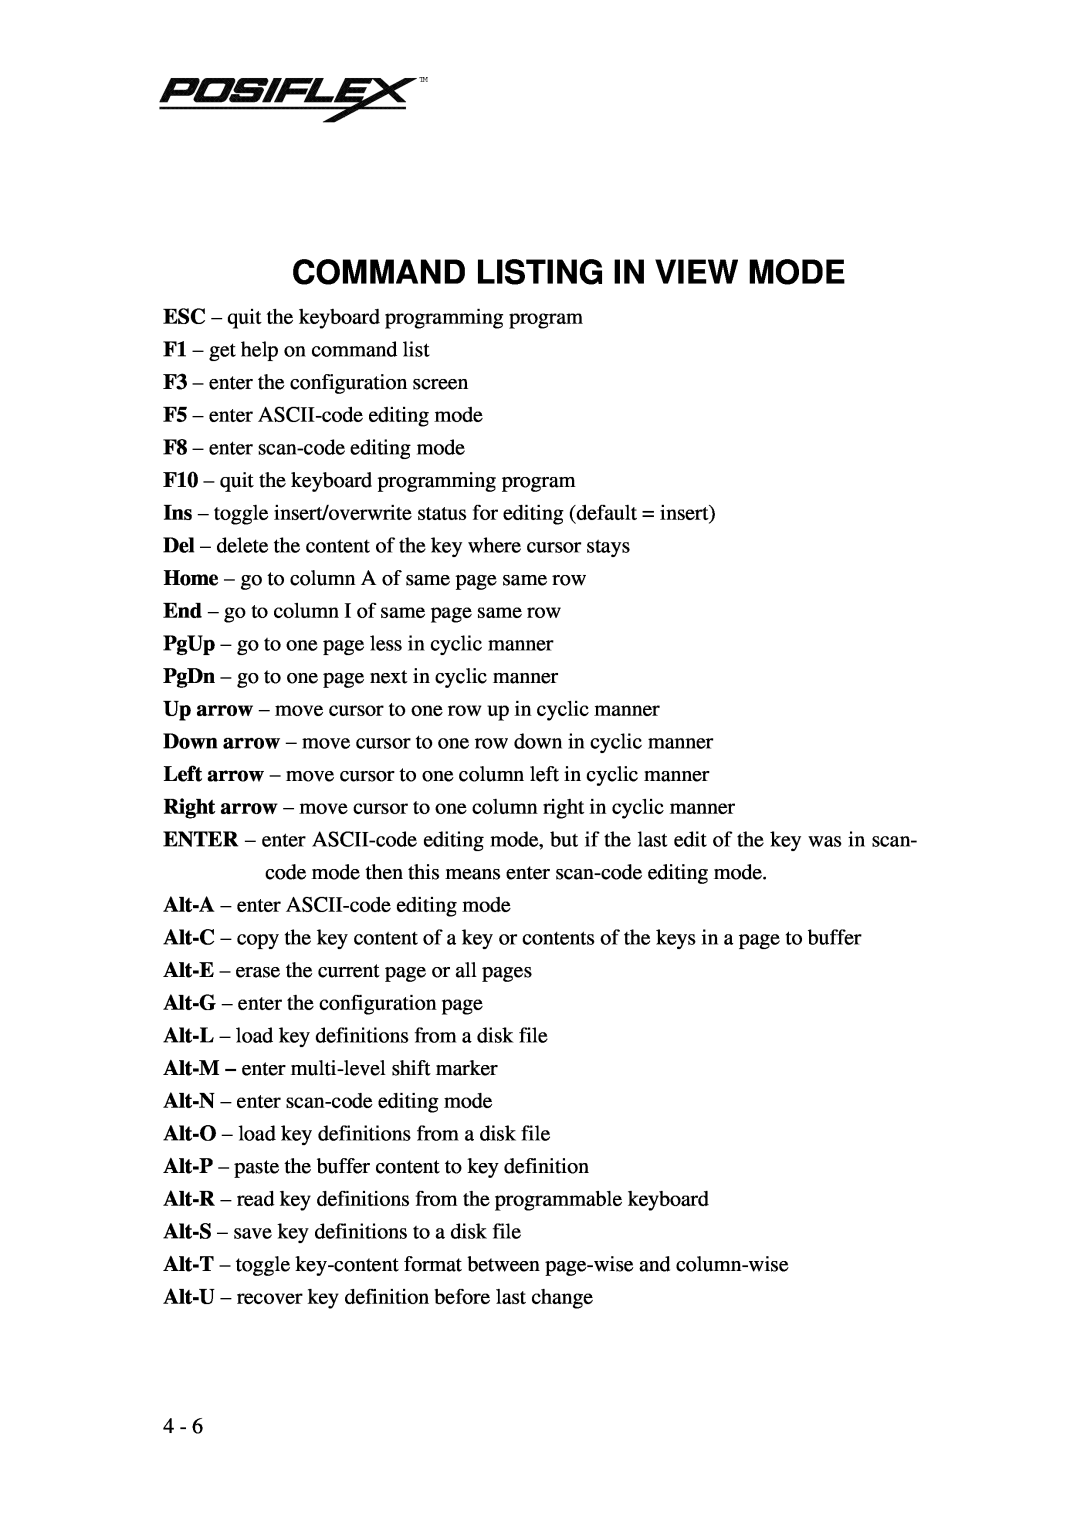 POSIFLEX Business Machines PST KB136 manual Command Listing In View Mode 